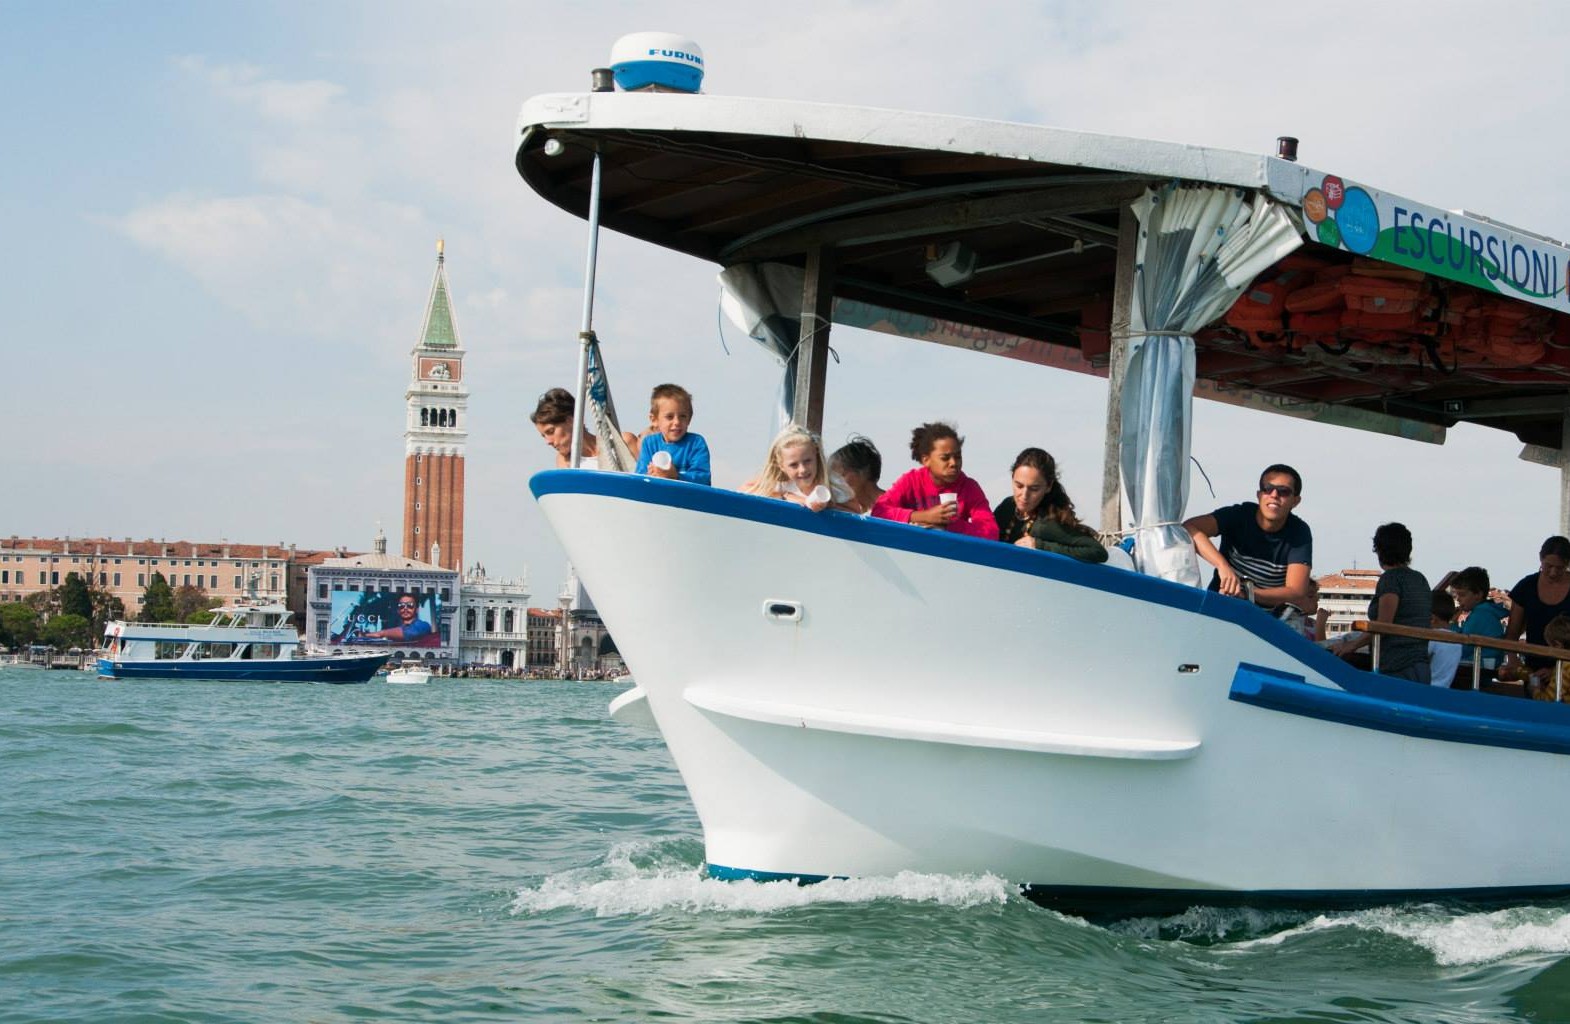 Boat tour of Murano, Burano and Torcello islands